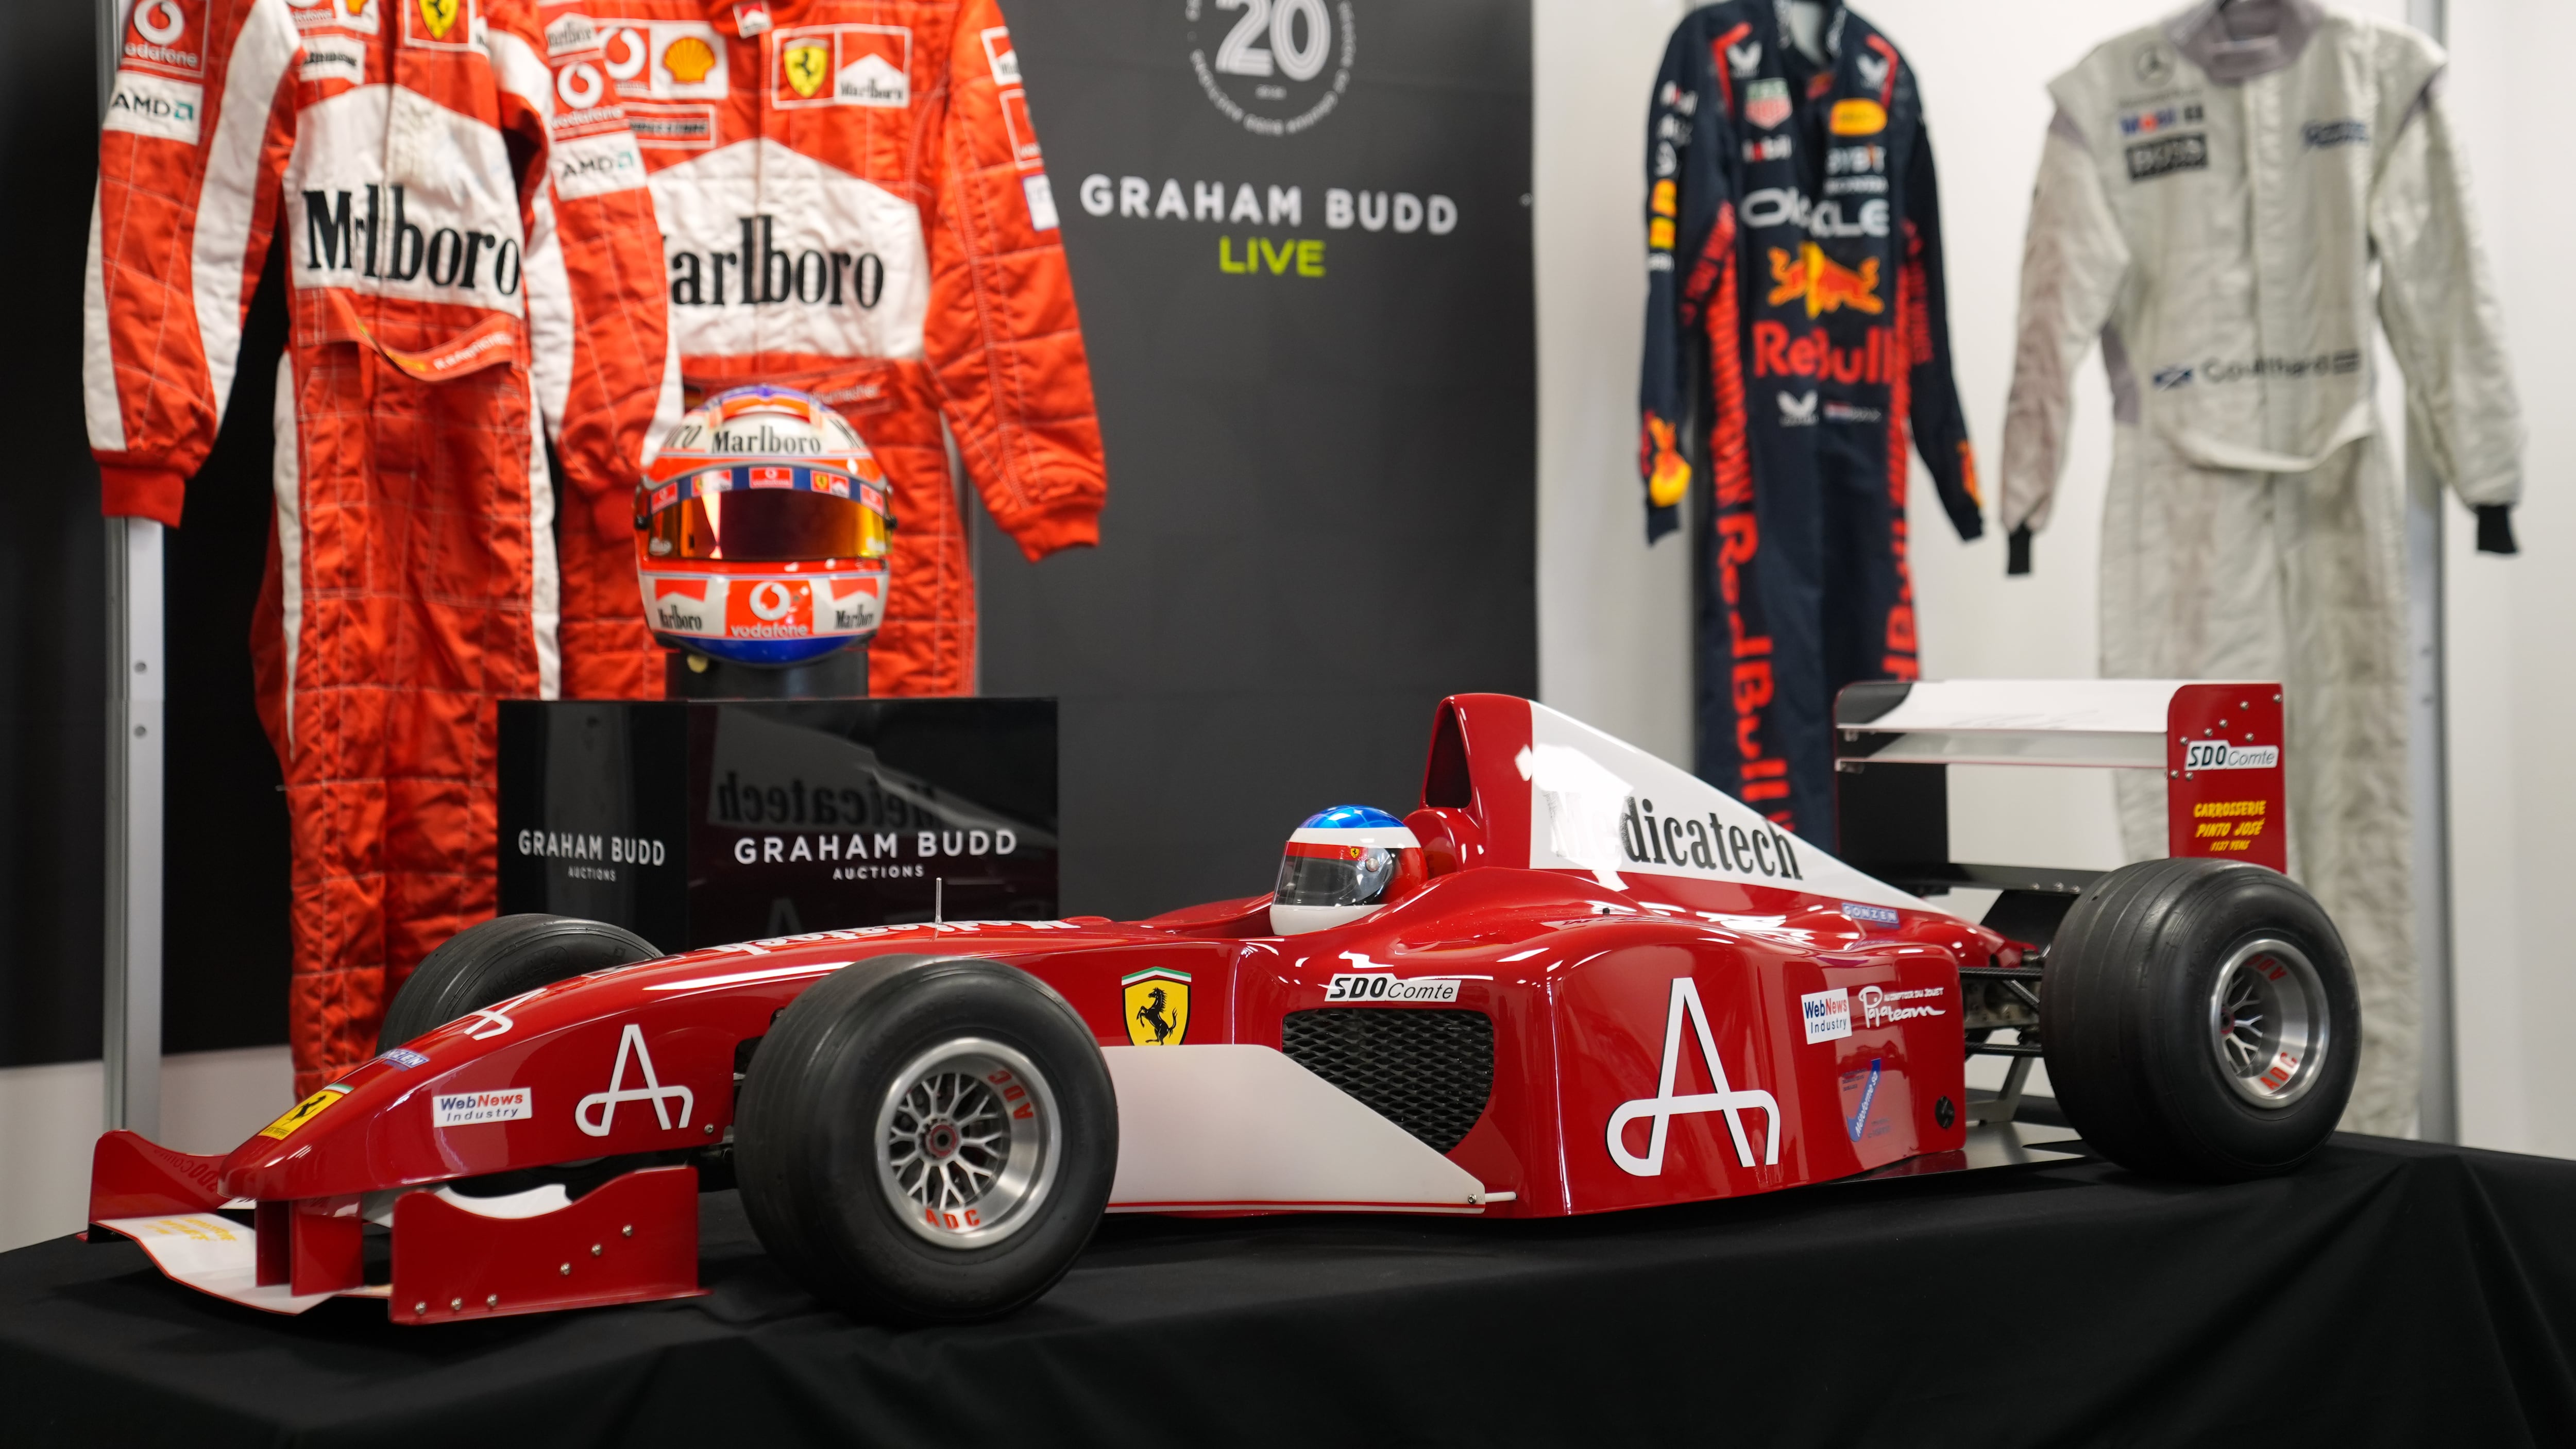 The remote-controlled replica of Michael Schumacher’s Ferrari F2002 is going under the hammer at Silverstone ahead of the British Grand Prix